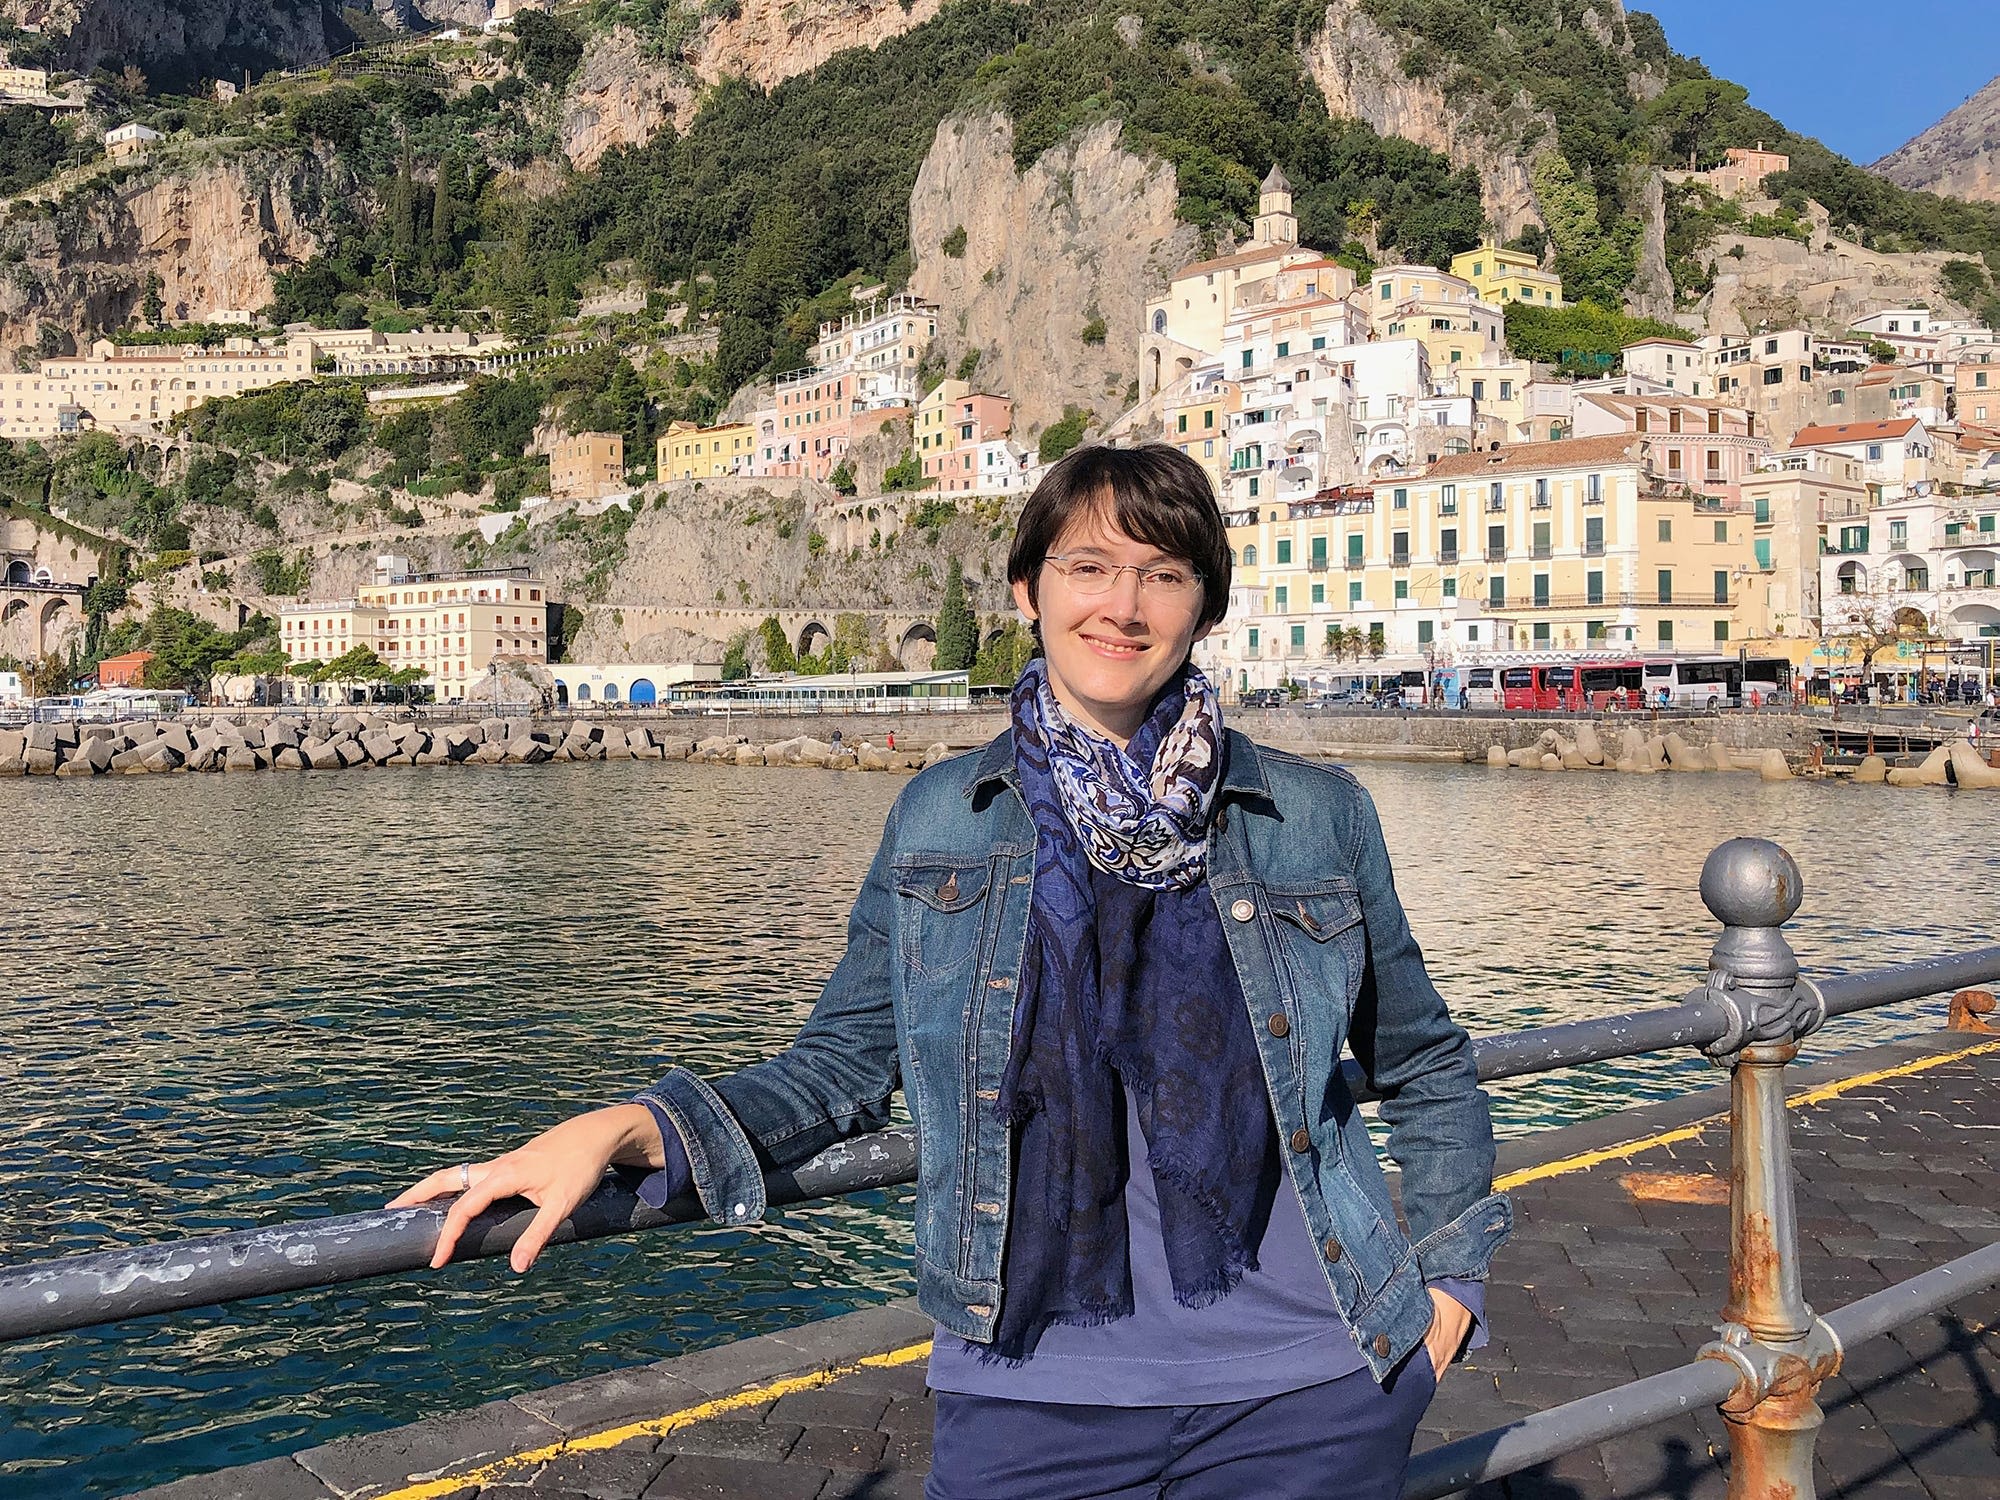 I've lived on the Amalfi Coast for 17 years. Here are the 7 mistakes tourists should avoid making while visiting.